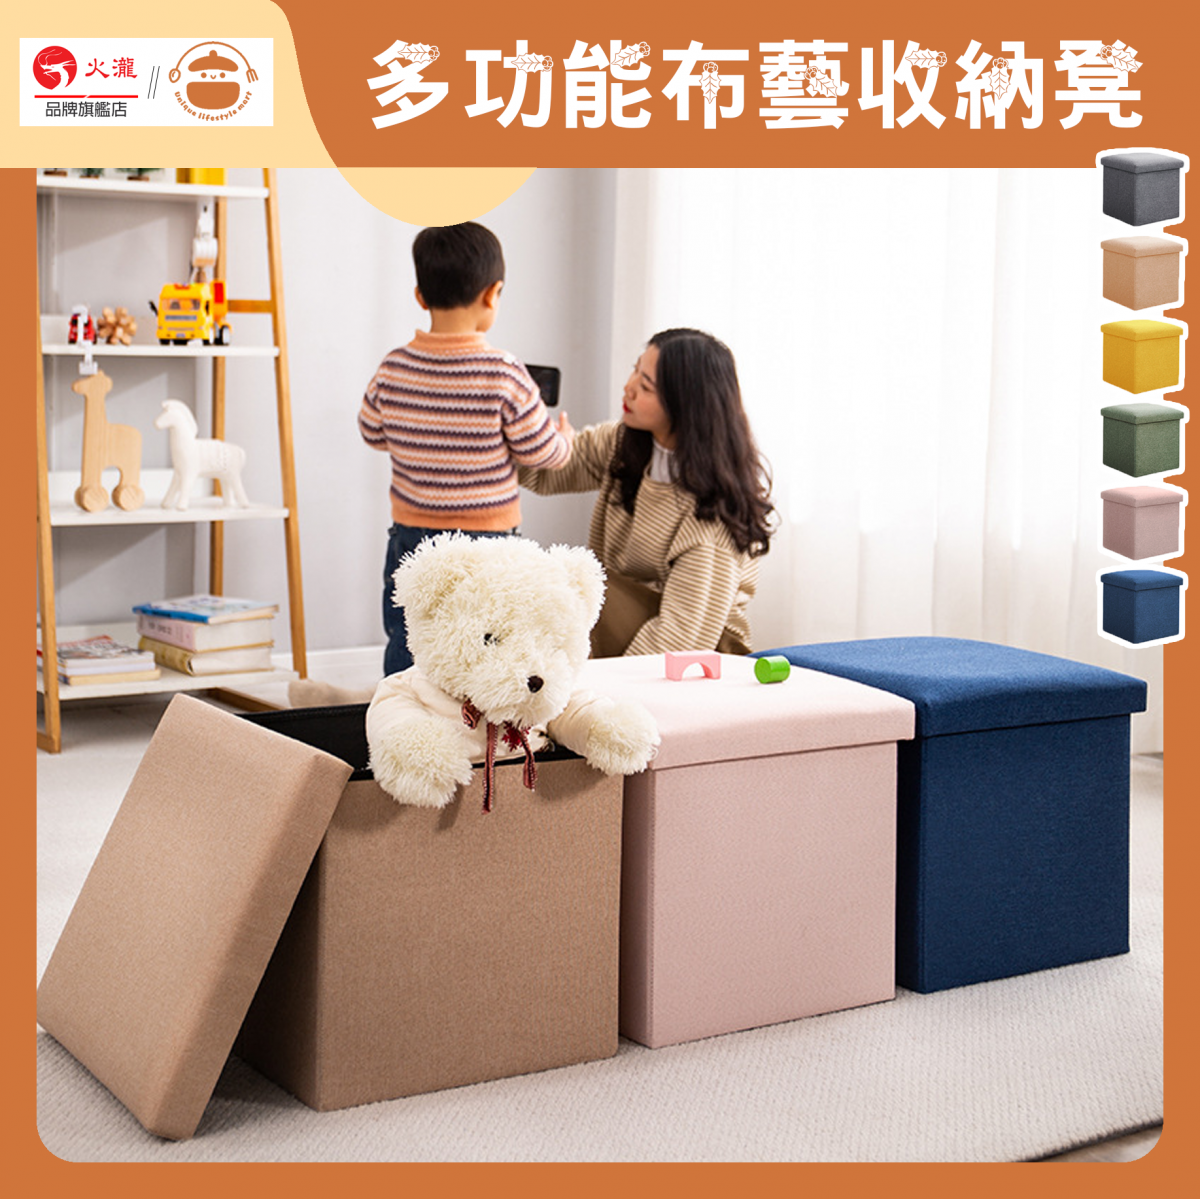 Multifunctional Fabric Storage Stool【55L】-Foldable Comb Stool | Storage Stool | Coffee Table Chair | Small Sofa | Low Stool | Shoe Changing Stool | Snack Toy Storage Box